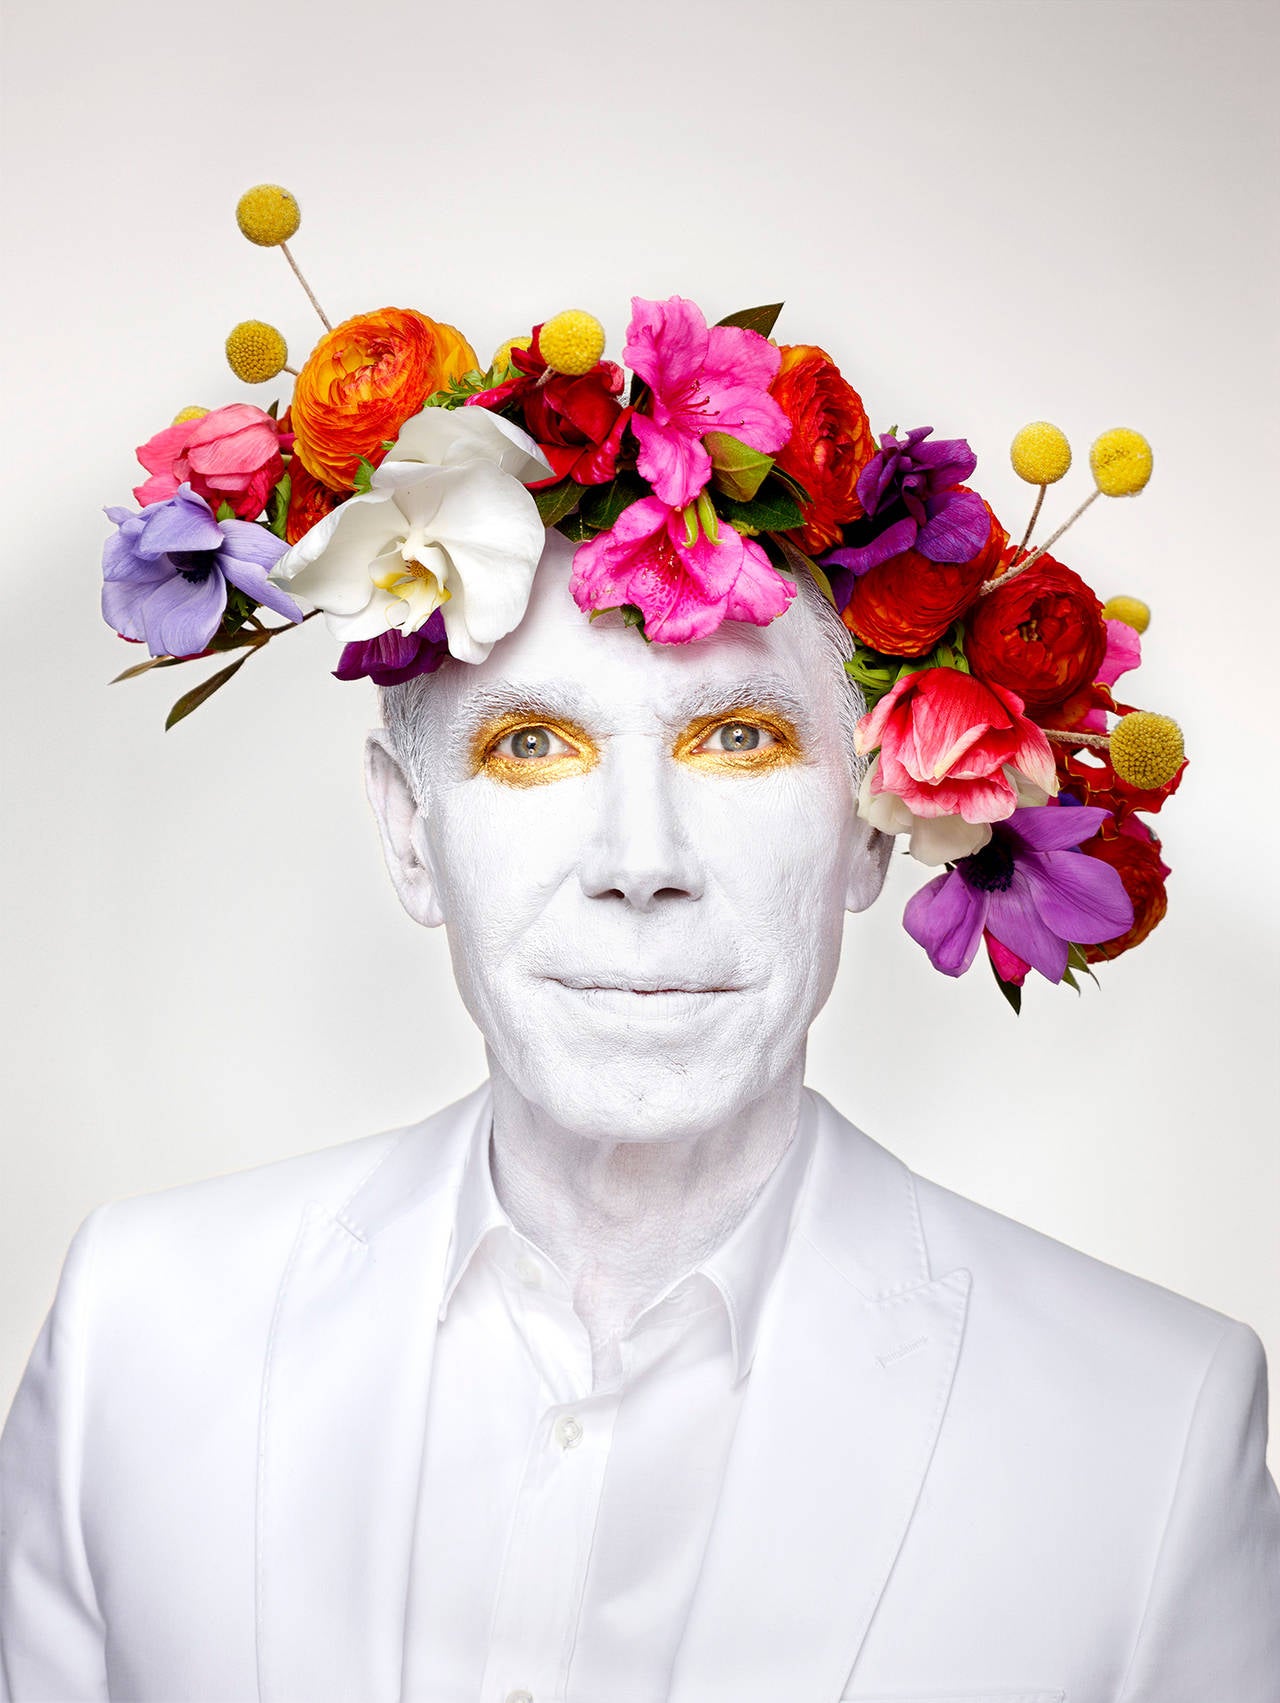 Martin Schoeller Portrait Photograph - Jeff Koons with Floral Headpiece, New York, NY